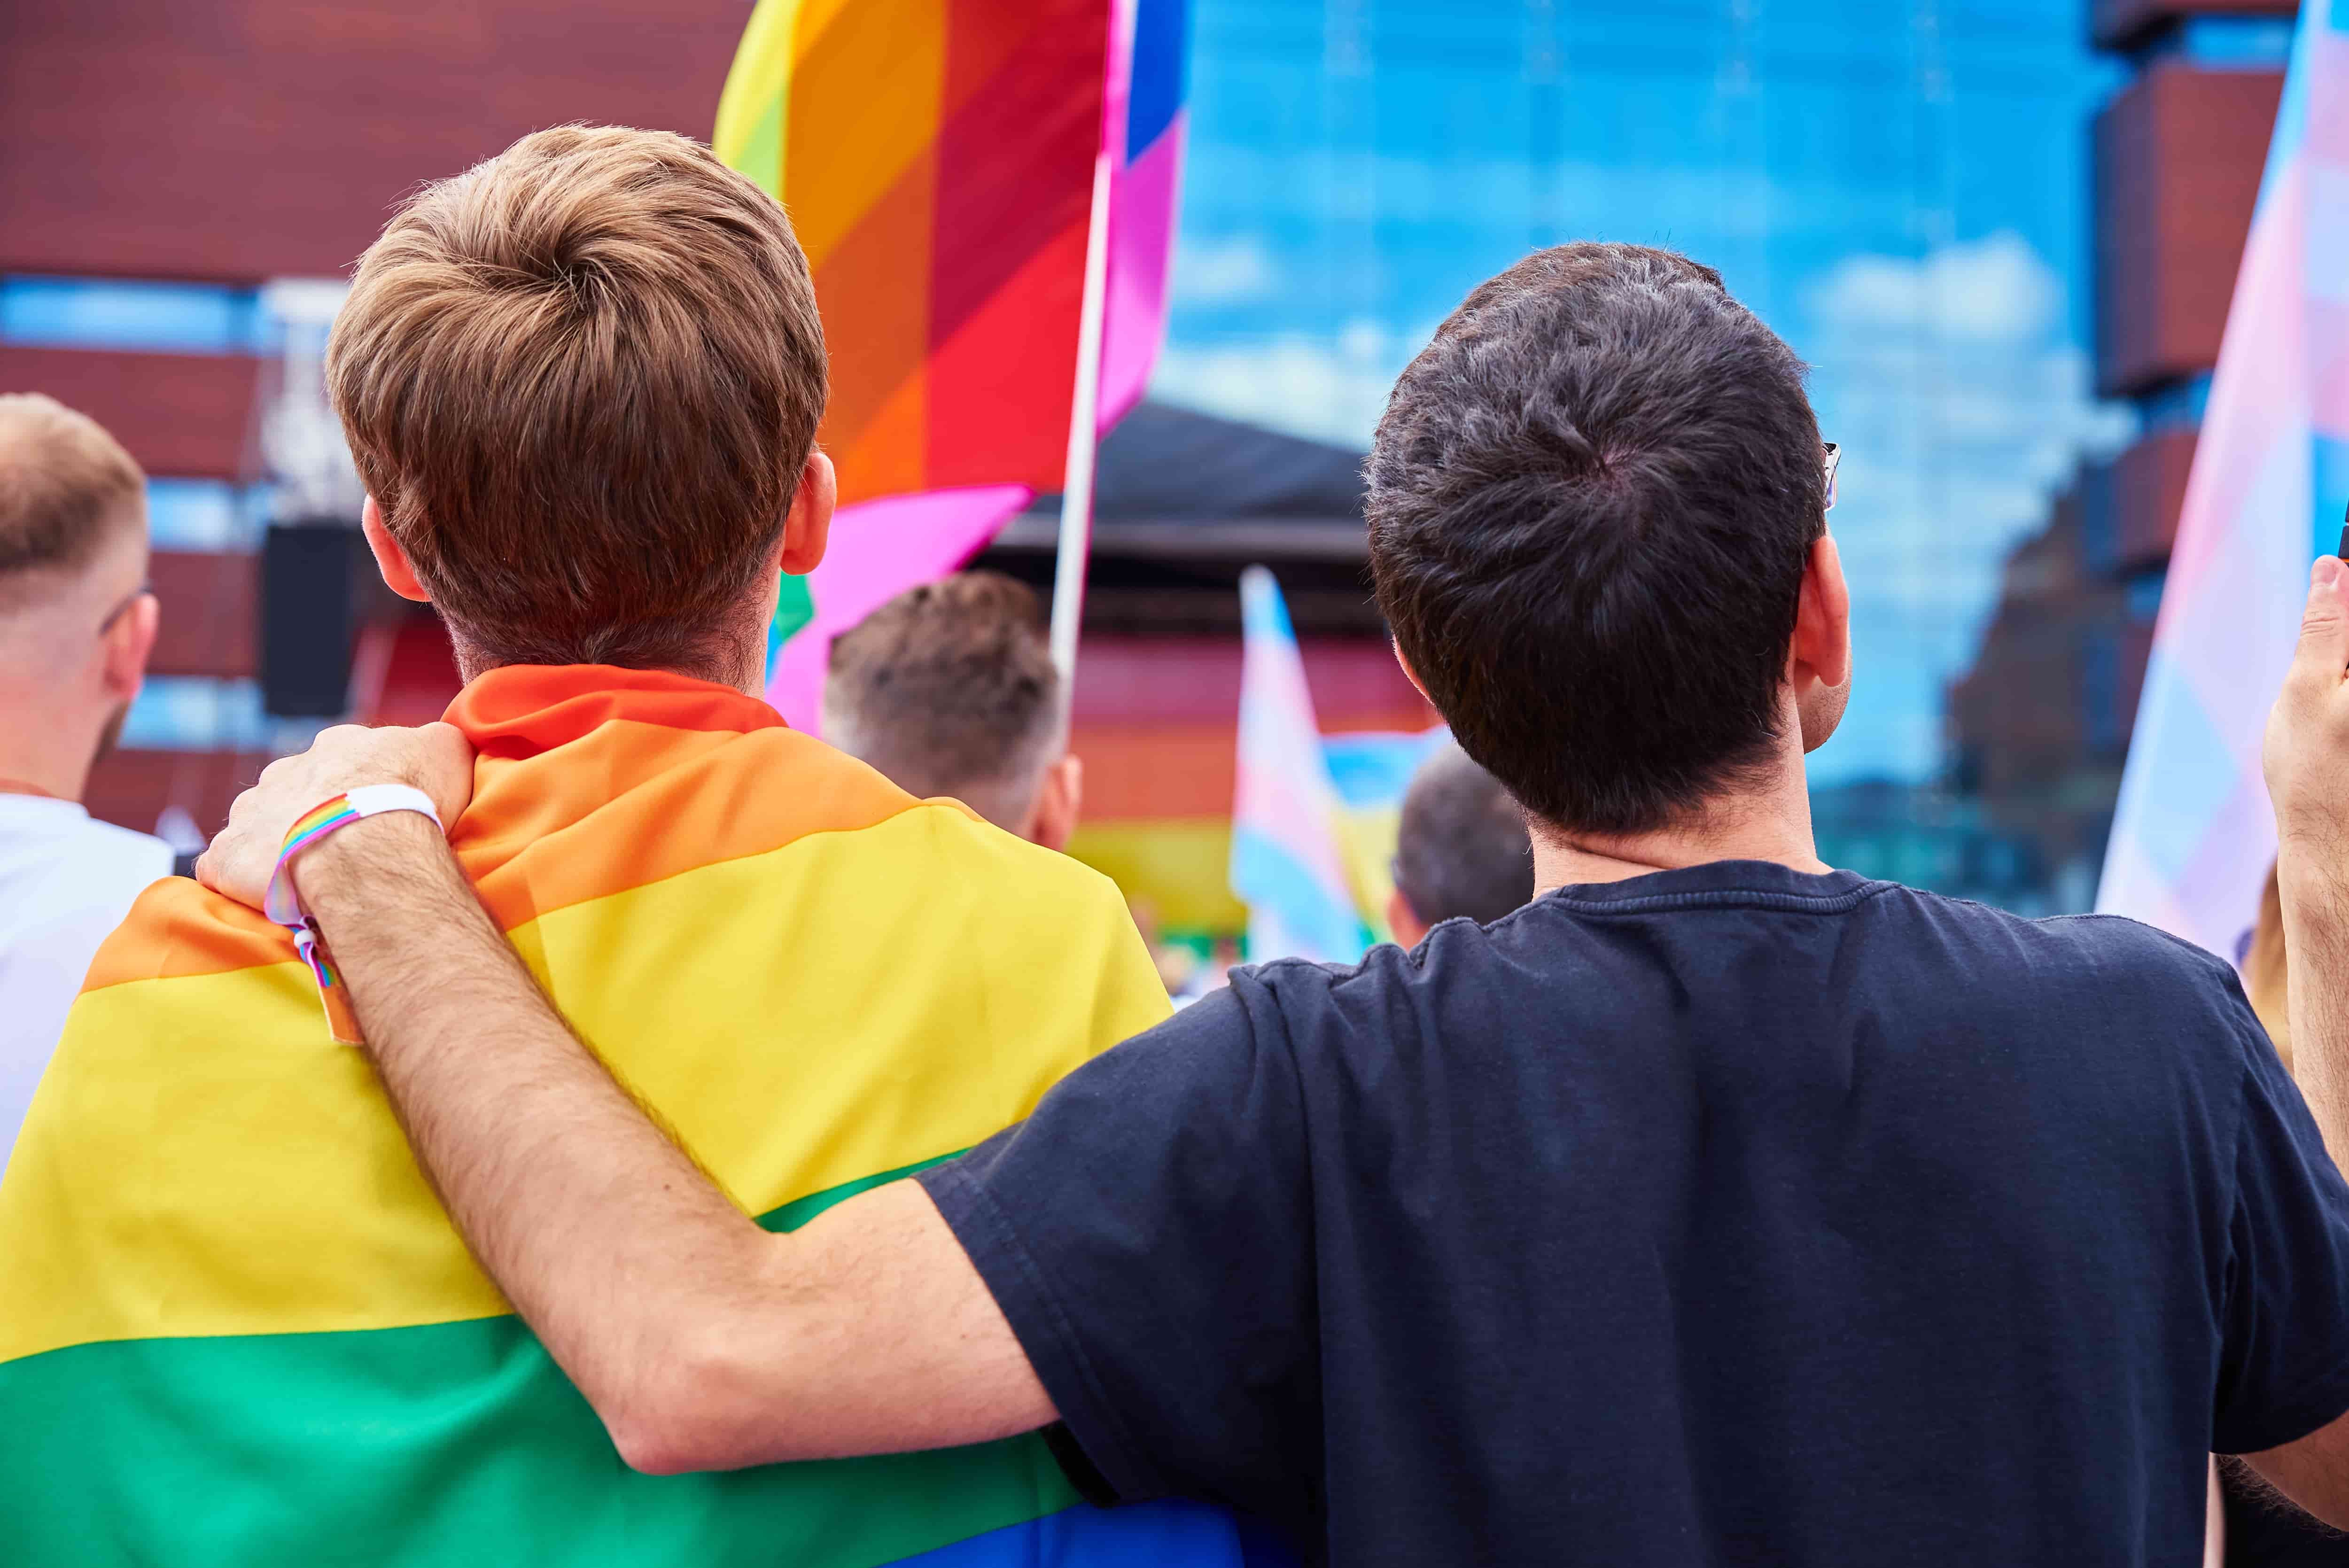 A man wearing a rainbow wristband puts his arm around the back of a man wrapped in a rainbow flag.